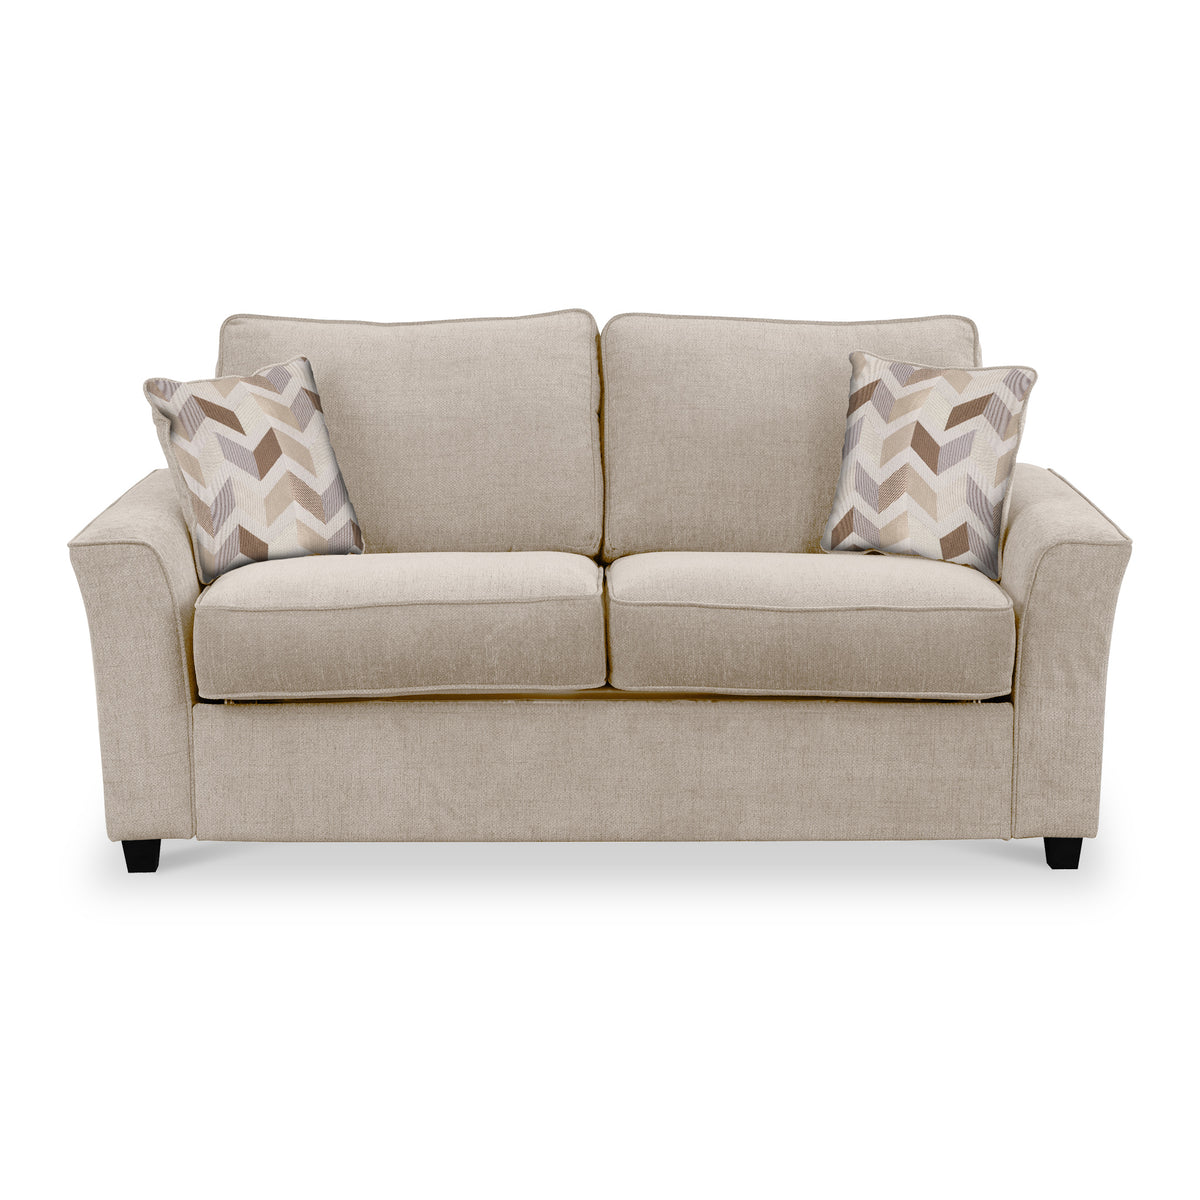 Boston 2 Seater Sofabed in Fawn with Morelisa Oatmeal Cushions by Roseland Furniture